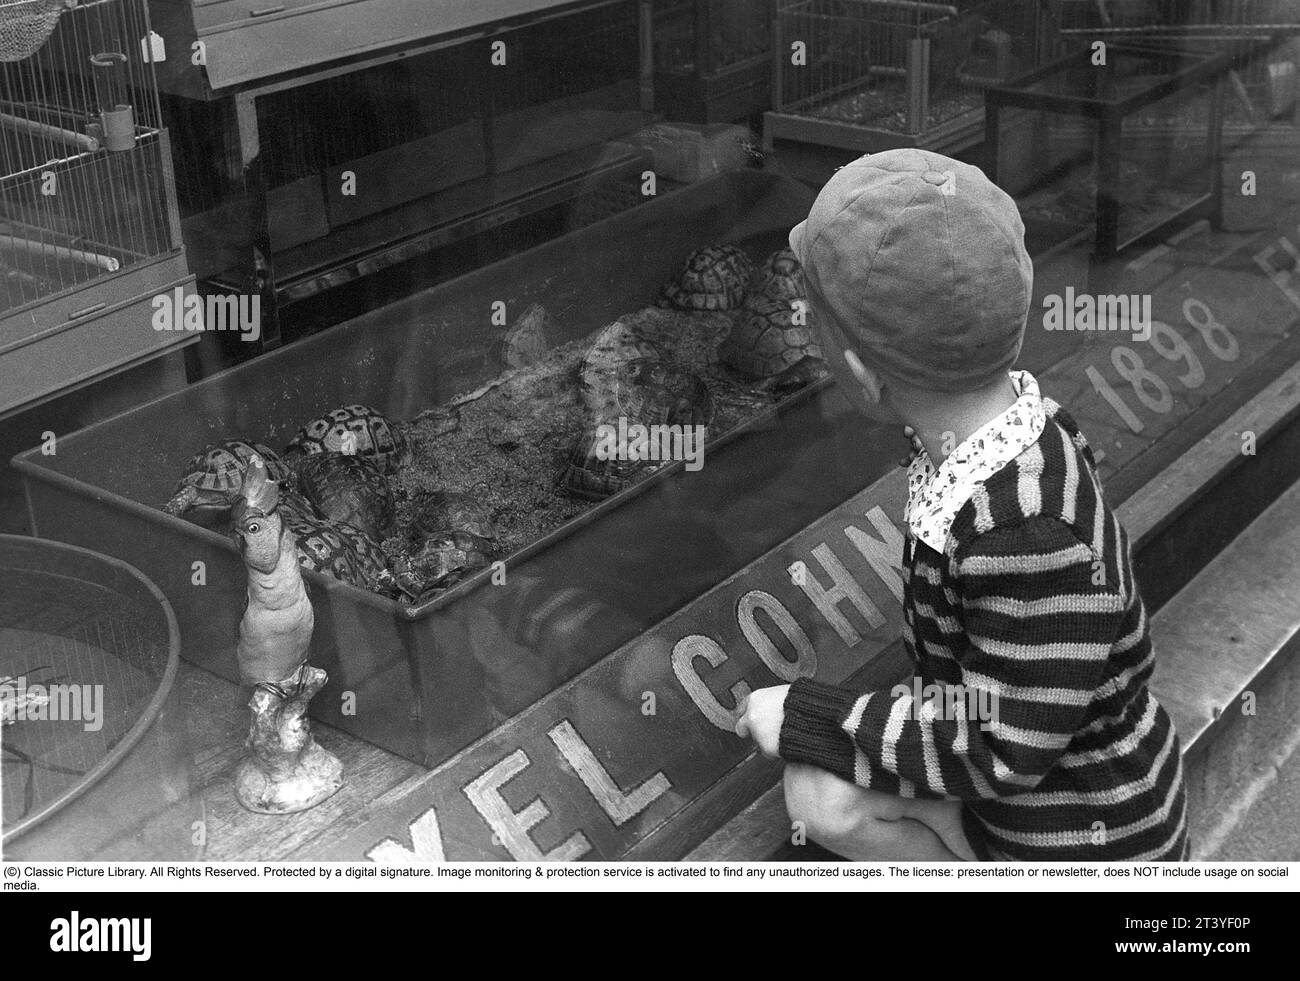 Stockholm 1954. A boy is fascinated by the turtles in the shop window of the Axel Cohn shop at Mäster Samuelsgatan 52. A shop that also sold caged birds and aquarium fish. Axel Cohn wrote the book Akvarieboken in 1929; a guide to the selection and care of aquarium fish. Birds fascinated the actually Danish citizen Axel Cohn, who already in the 1890s established his first pet shop in Klarakvarteren in Stockholm. Then he started selling canaries and other exotic birds, which was a novelty at the time. In the 1920s, wild-caught native birds were most commonly used as cage birds. Sweden. Kristoffe Stock Photo